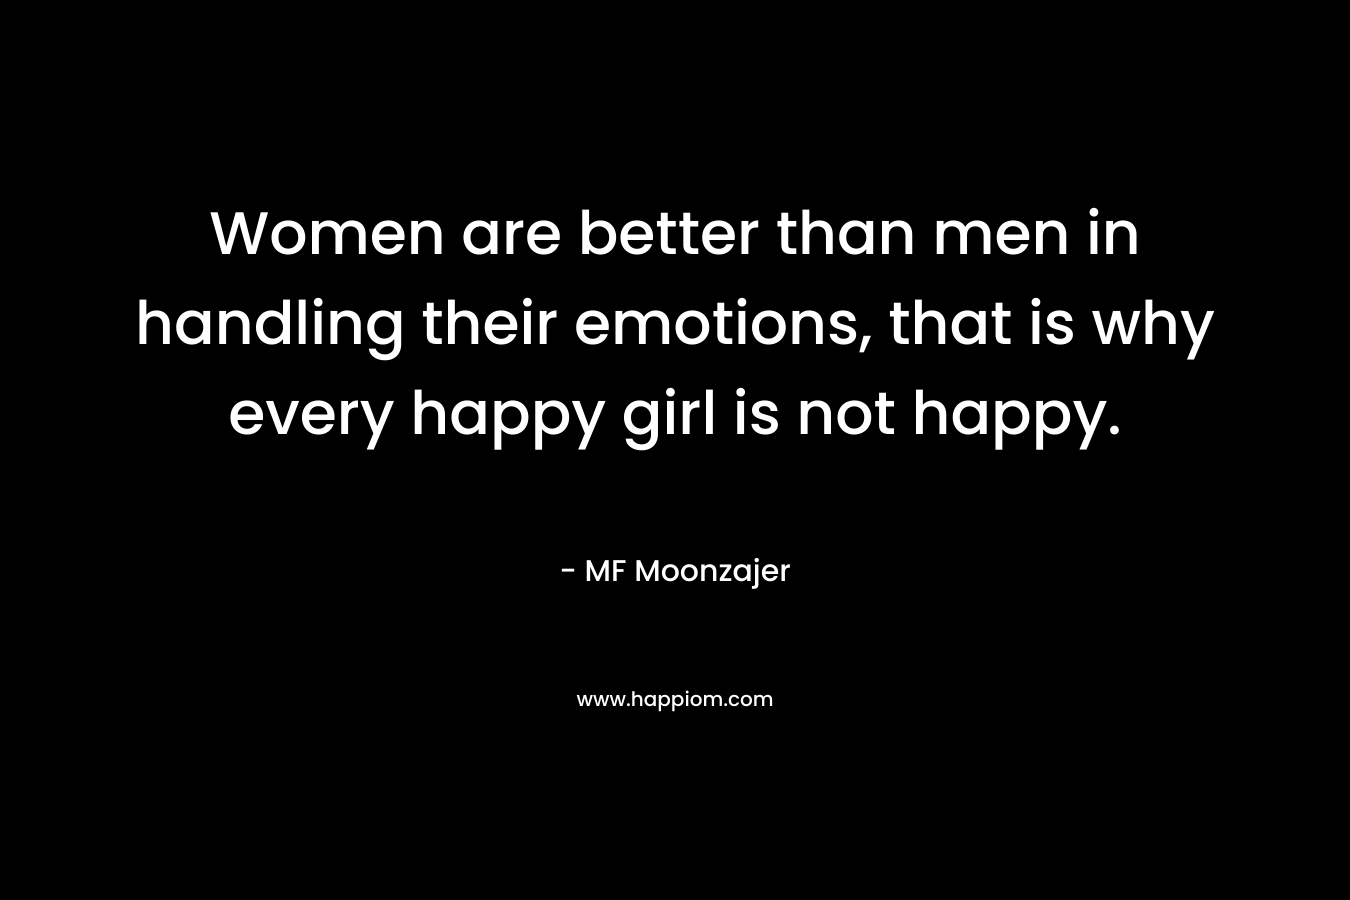 Women are better than men in handling their emotions, that is why every happy girl is not happy. – MF Moonzajer